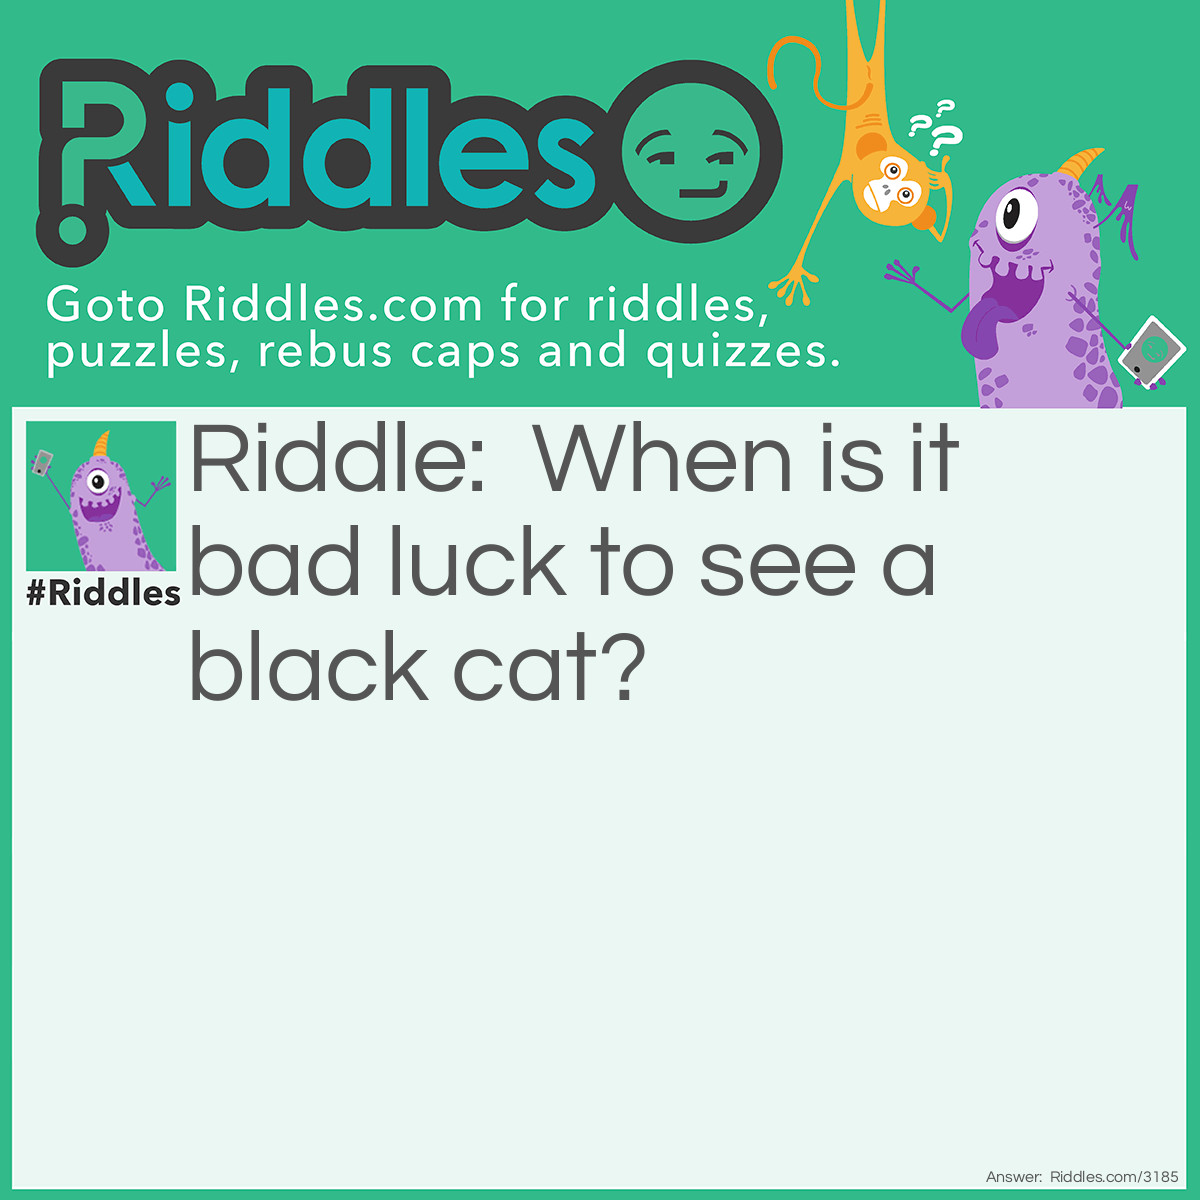 Riddle: When is it bad luck to see a black cat? Answer: When you are a mouse.